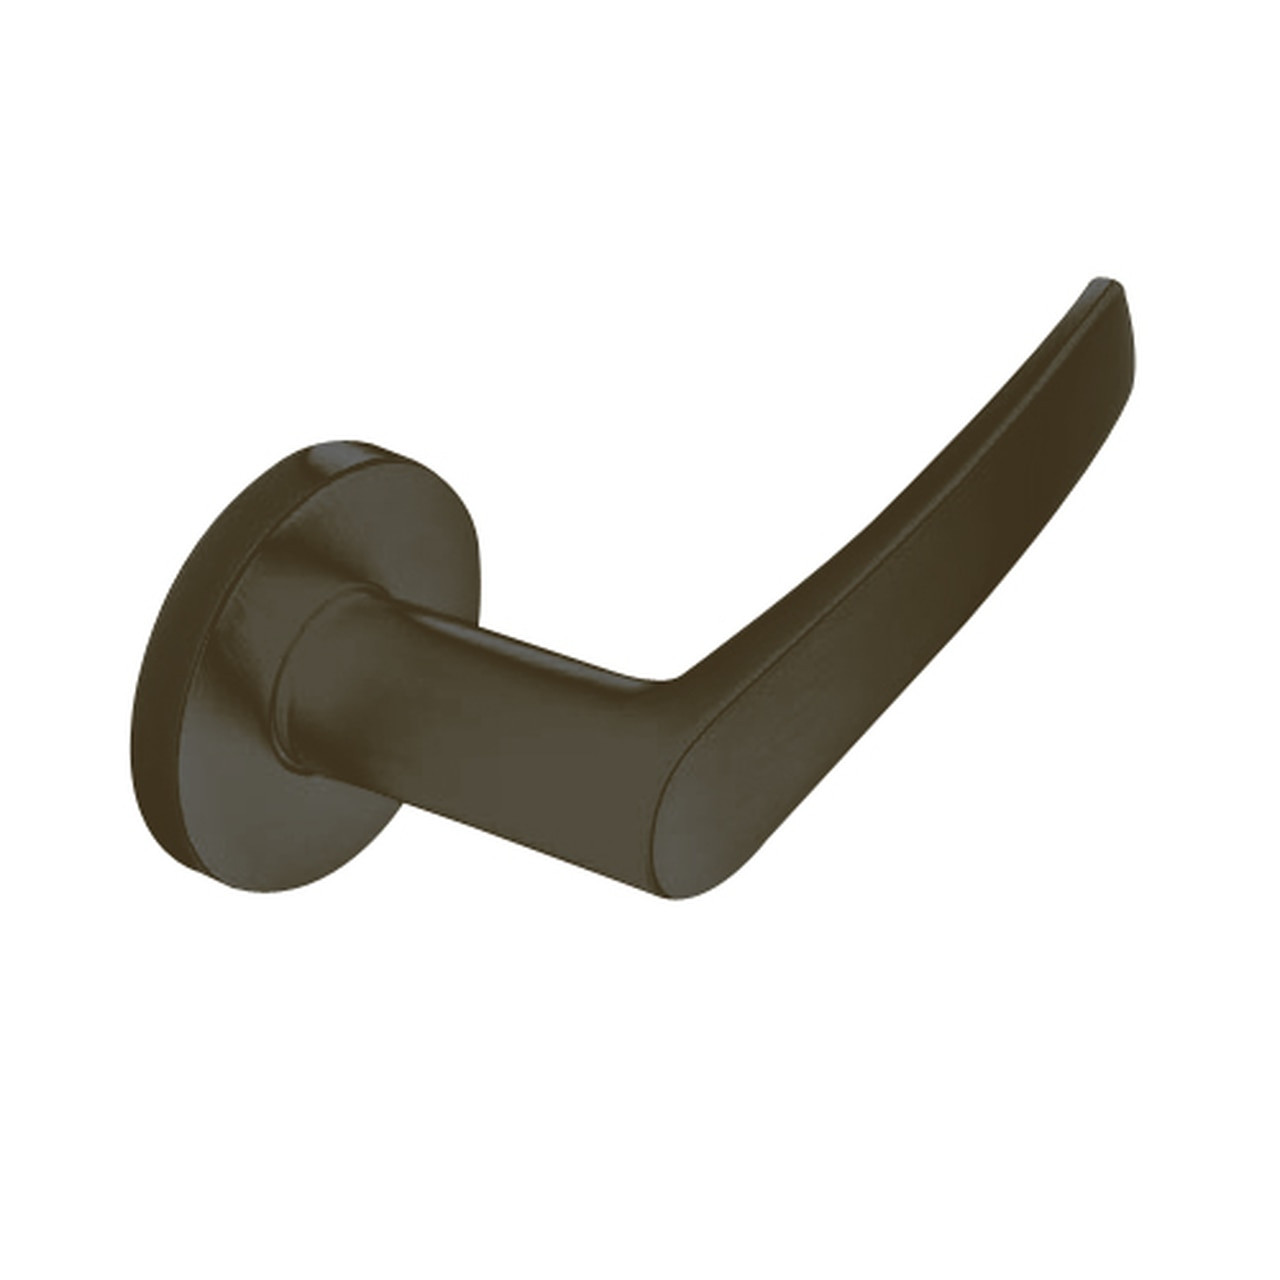 ML2058-ASA-613-CL6 Corbin Russwin ML2000 Series IC 6-Pin Less Core Mortise Entrance Holdback Locksets with Armstrong Lever in Oil Rubbed Bronze